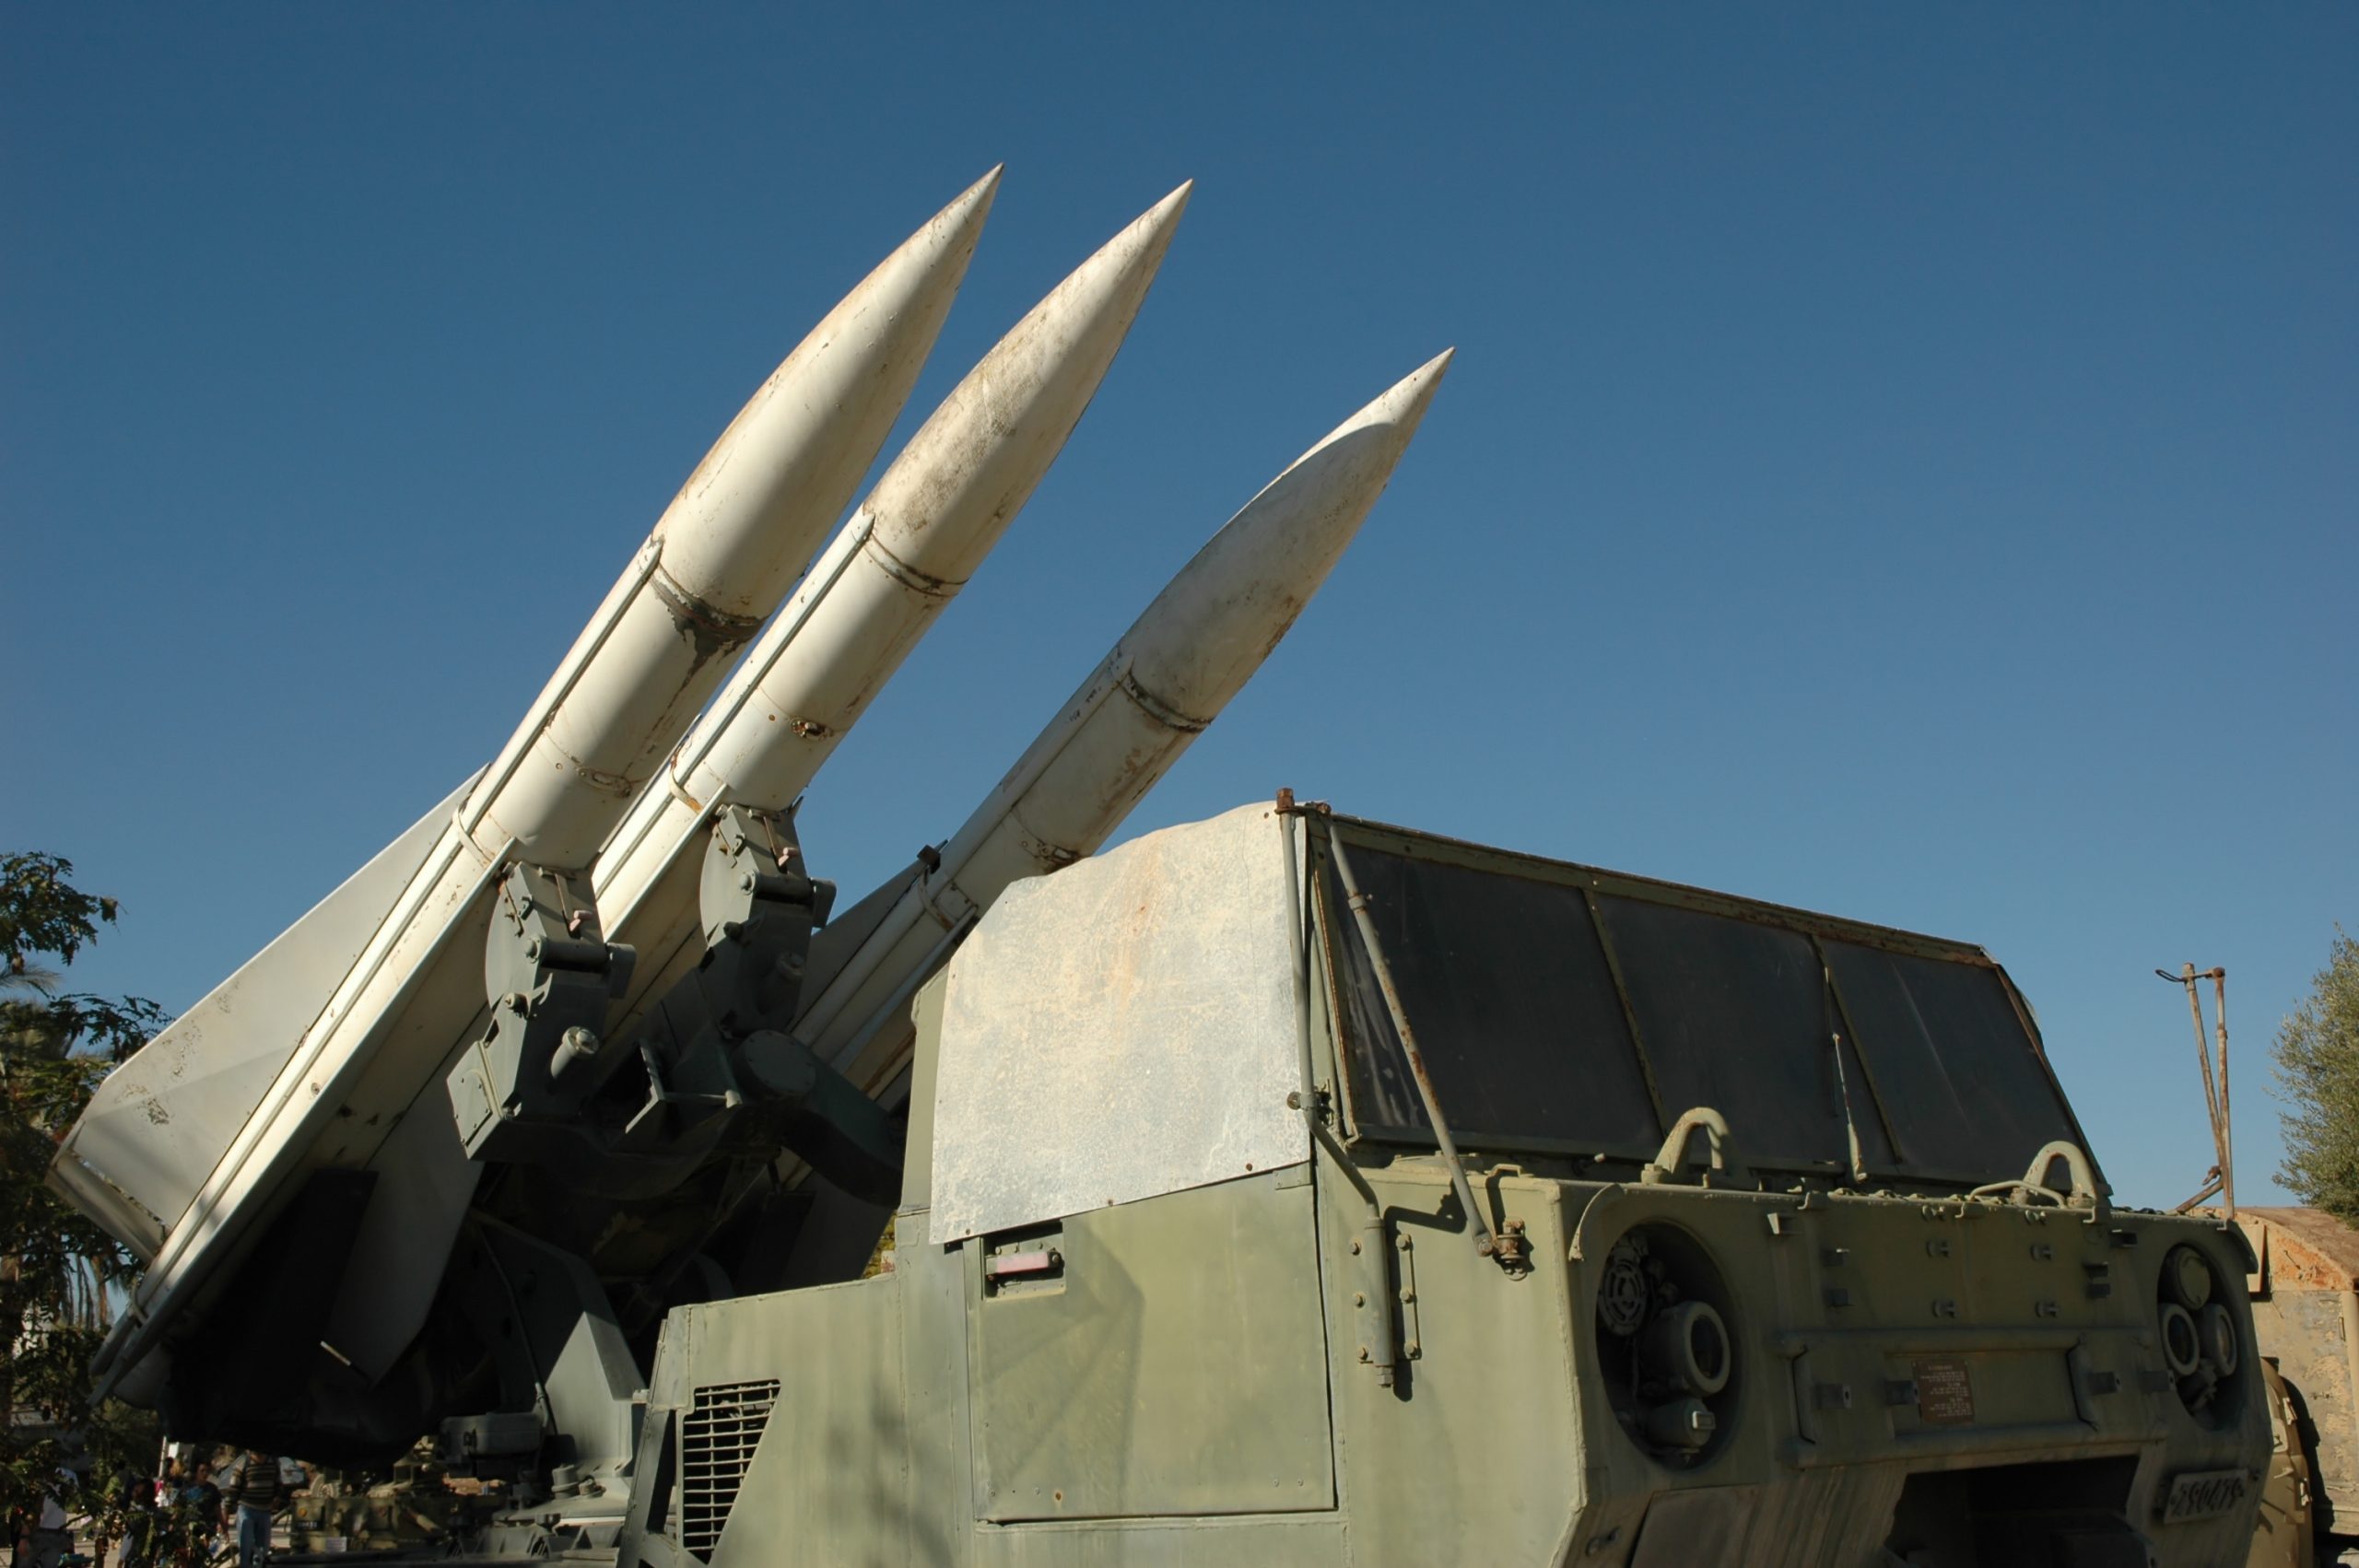 Missiles on a launcher טילים על גבי משגר טילים